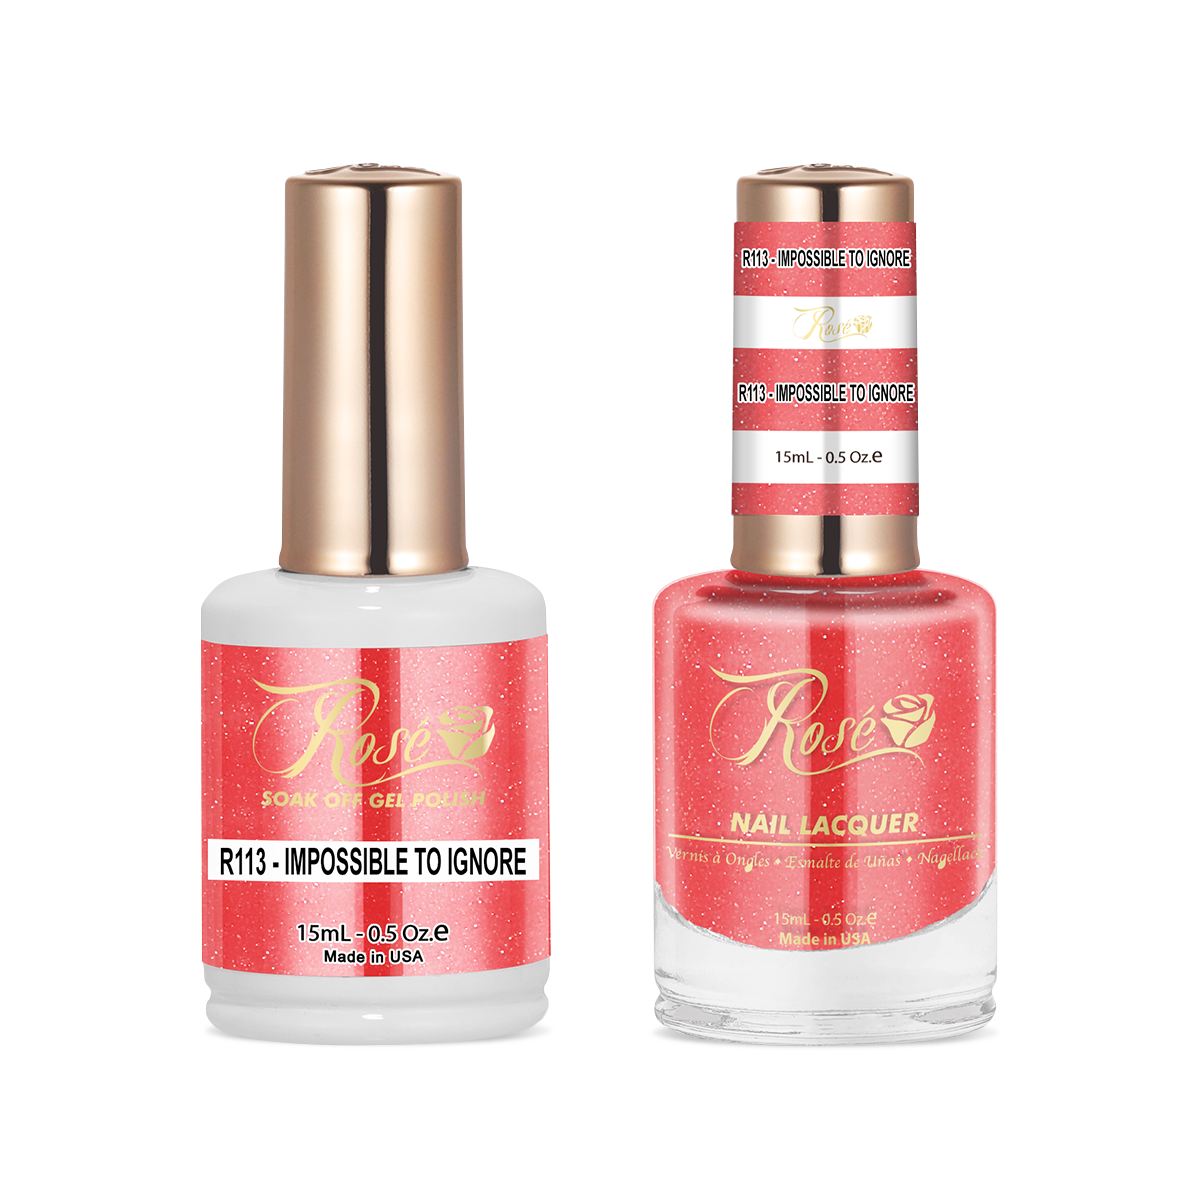 Rosé Duo - R113 Impossible To Ignore